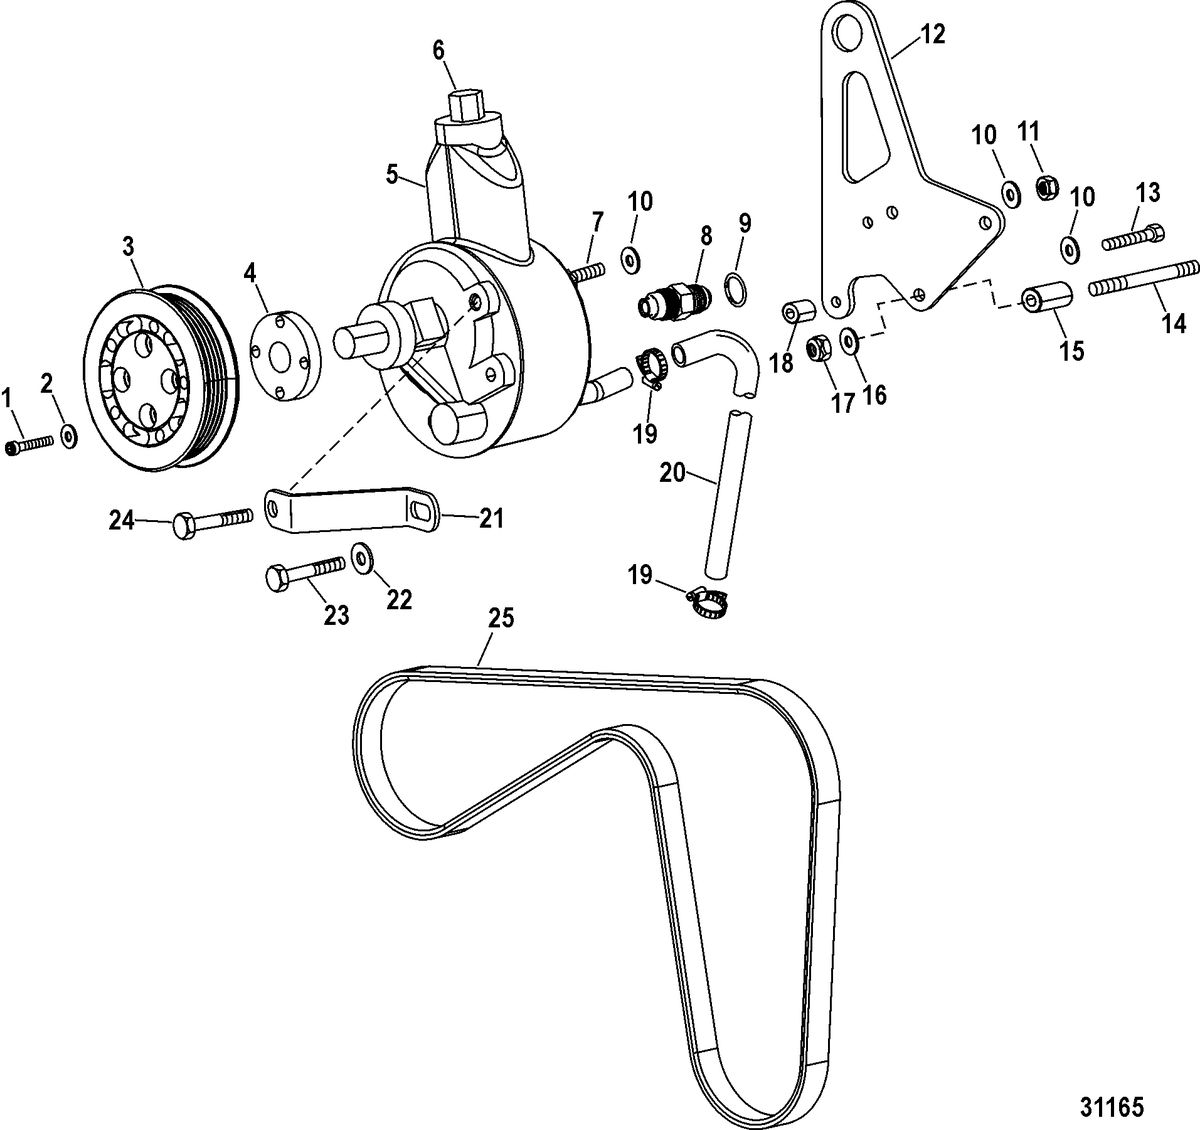 RACE STERNDRIVE 850 SCI Power-Assisted Steering Components(Design II)